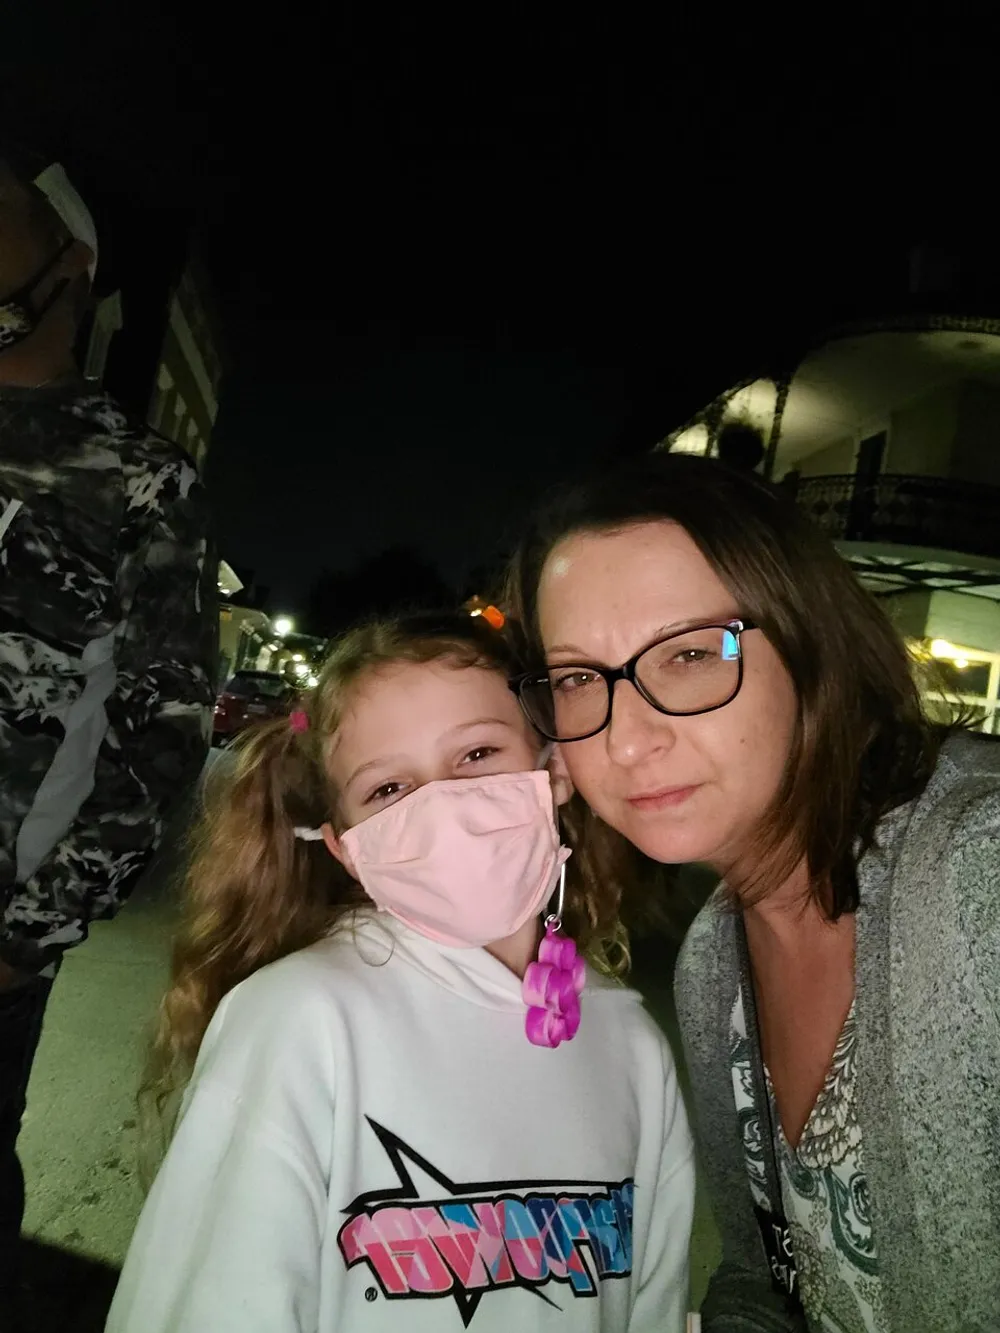 A smiling child wearing a pink face mask and an adult are posing closely together for a selfie at night with the child showing wearable accessories and the adult wearing glasses